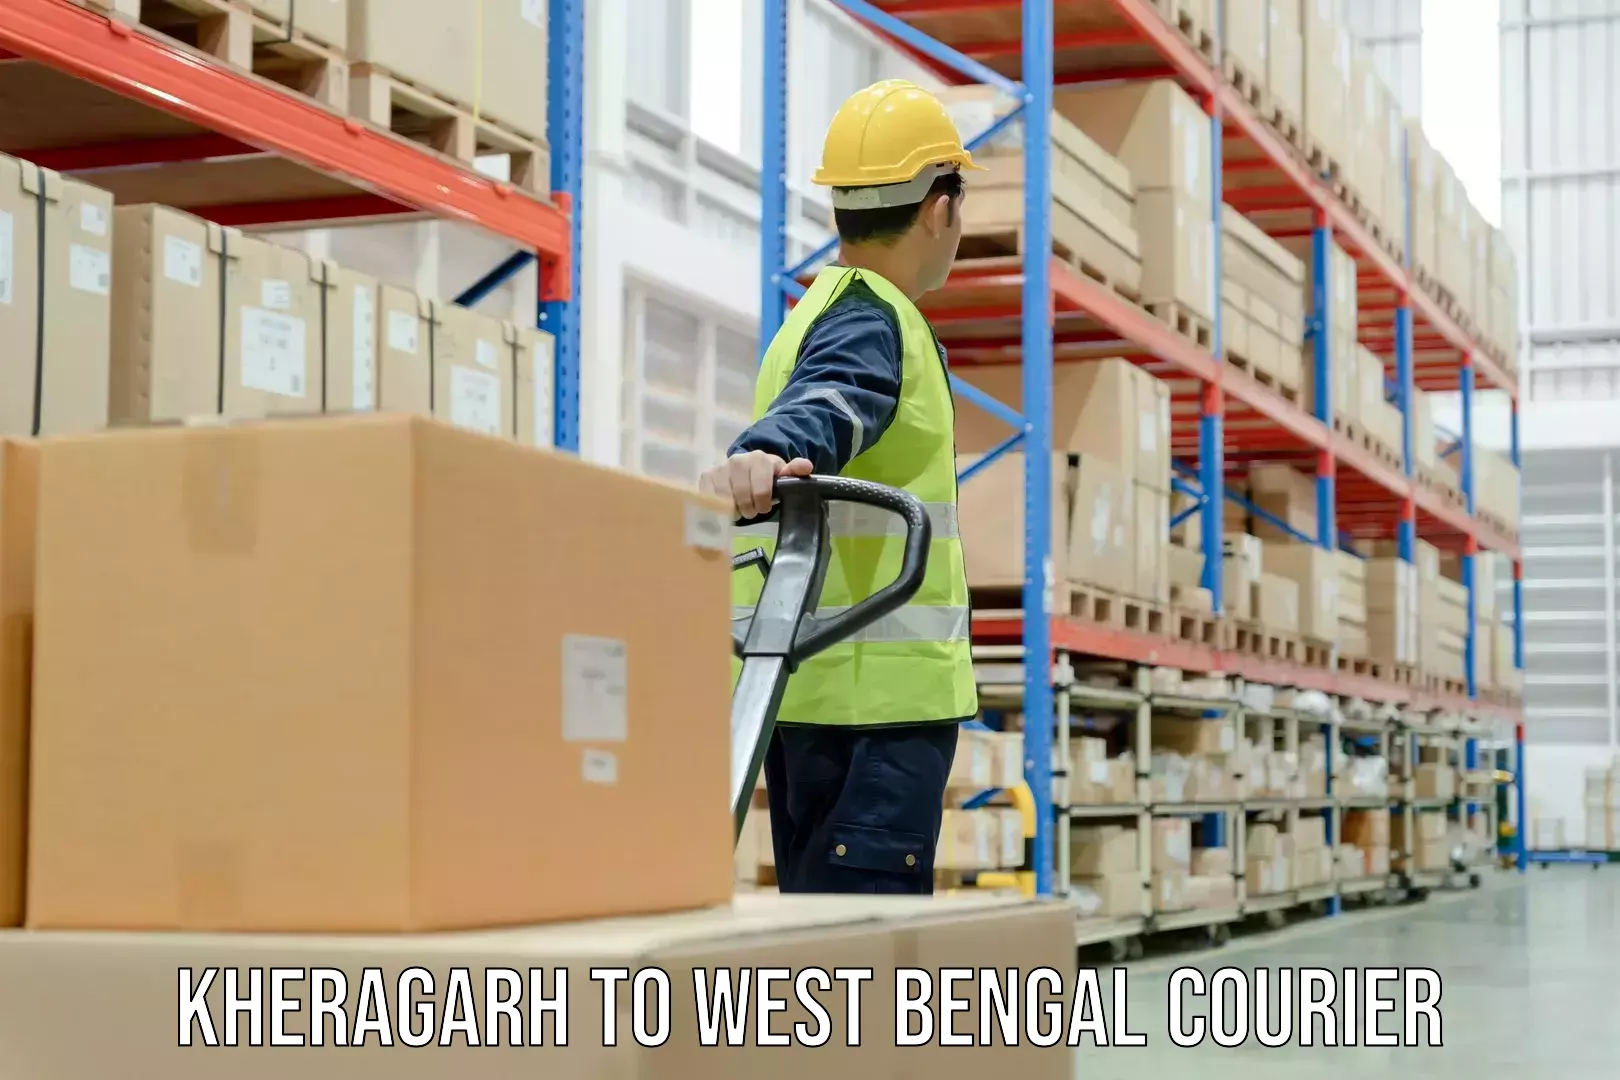 International courier networks Kheragarh to West Bengal